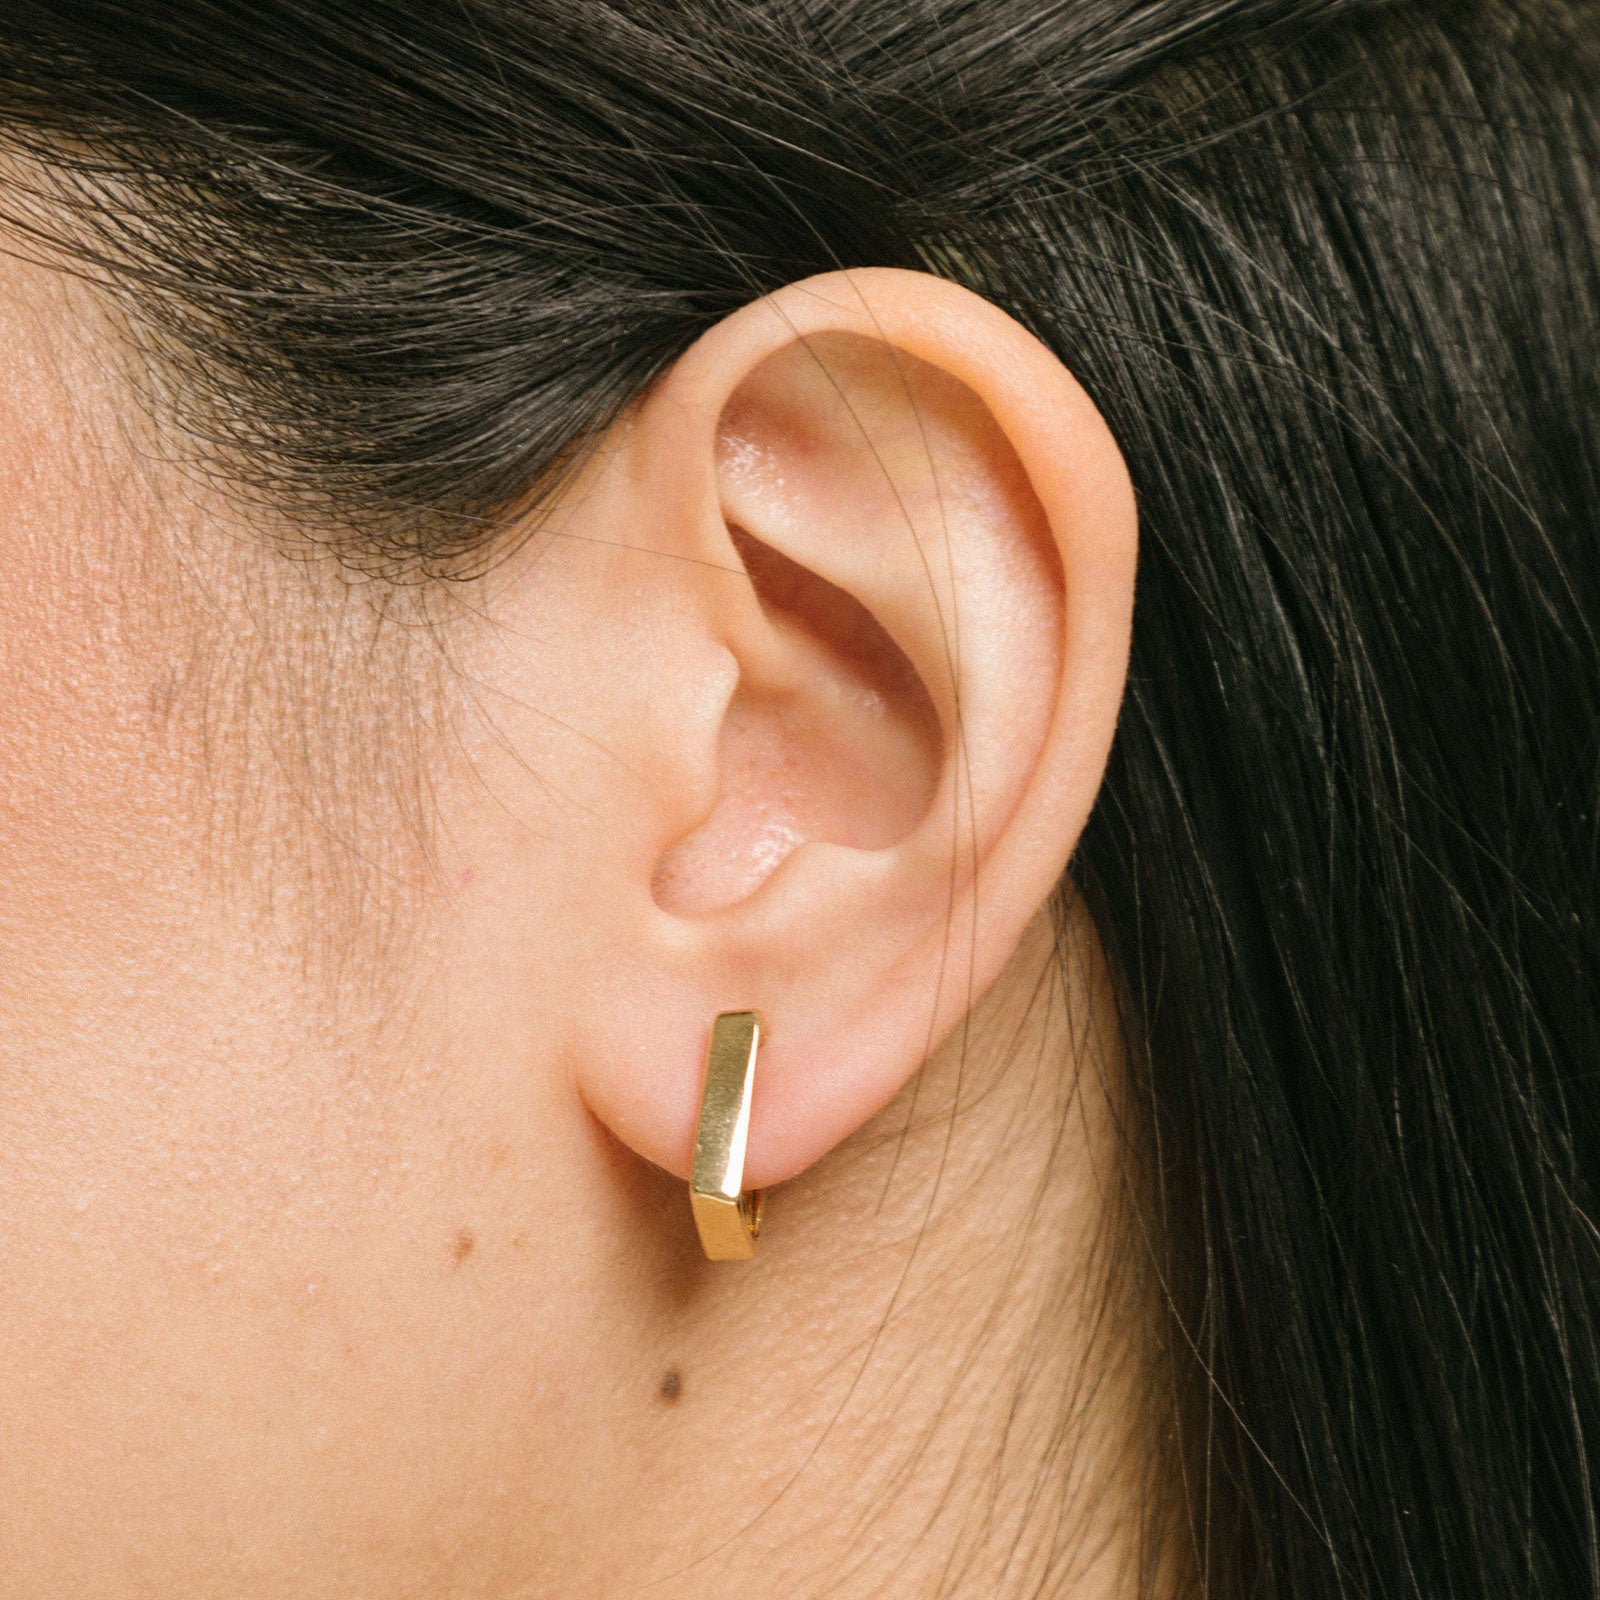 A model wearing our Classic Square Huggie Hoop Clip-On Earrings - 14k Gold plated metal alloy, non-tarnish, and water-resistant. Modern square clip-on design with mosquito coil closure and paddings for a secure, comfortable fit all day.